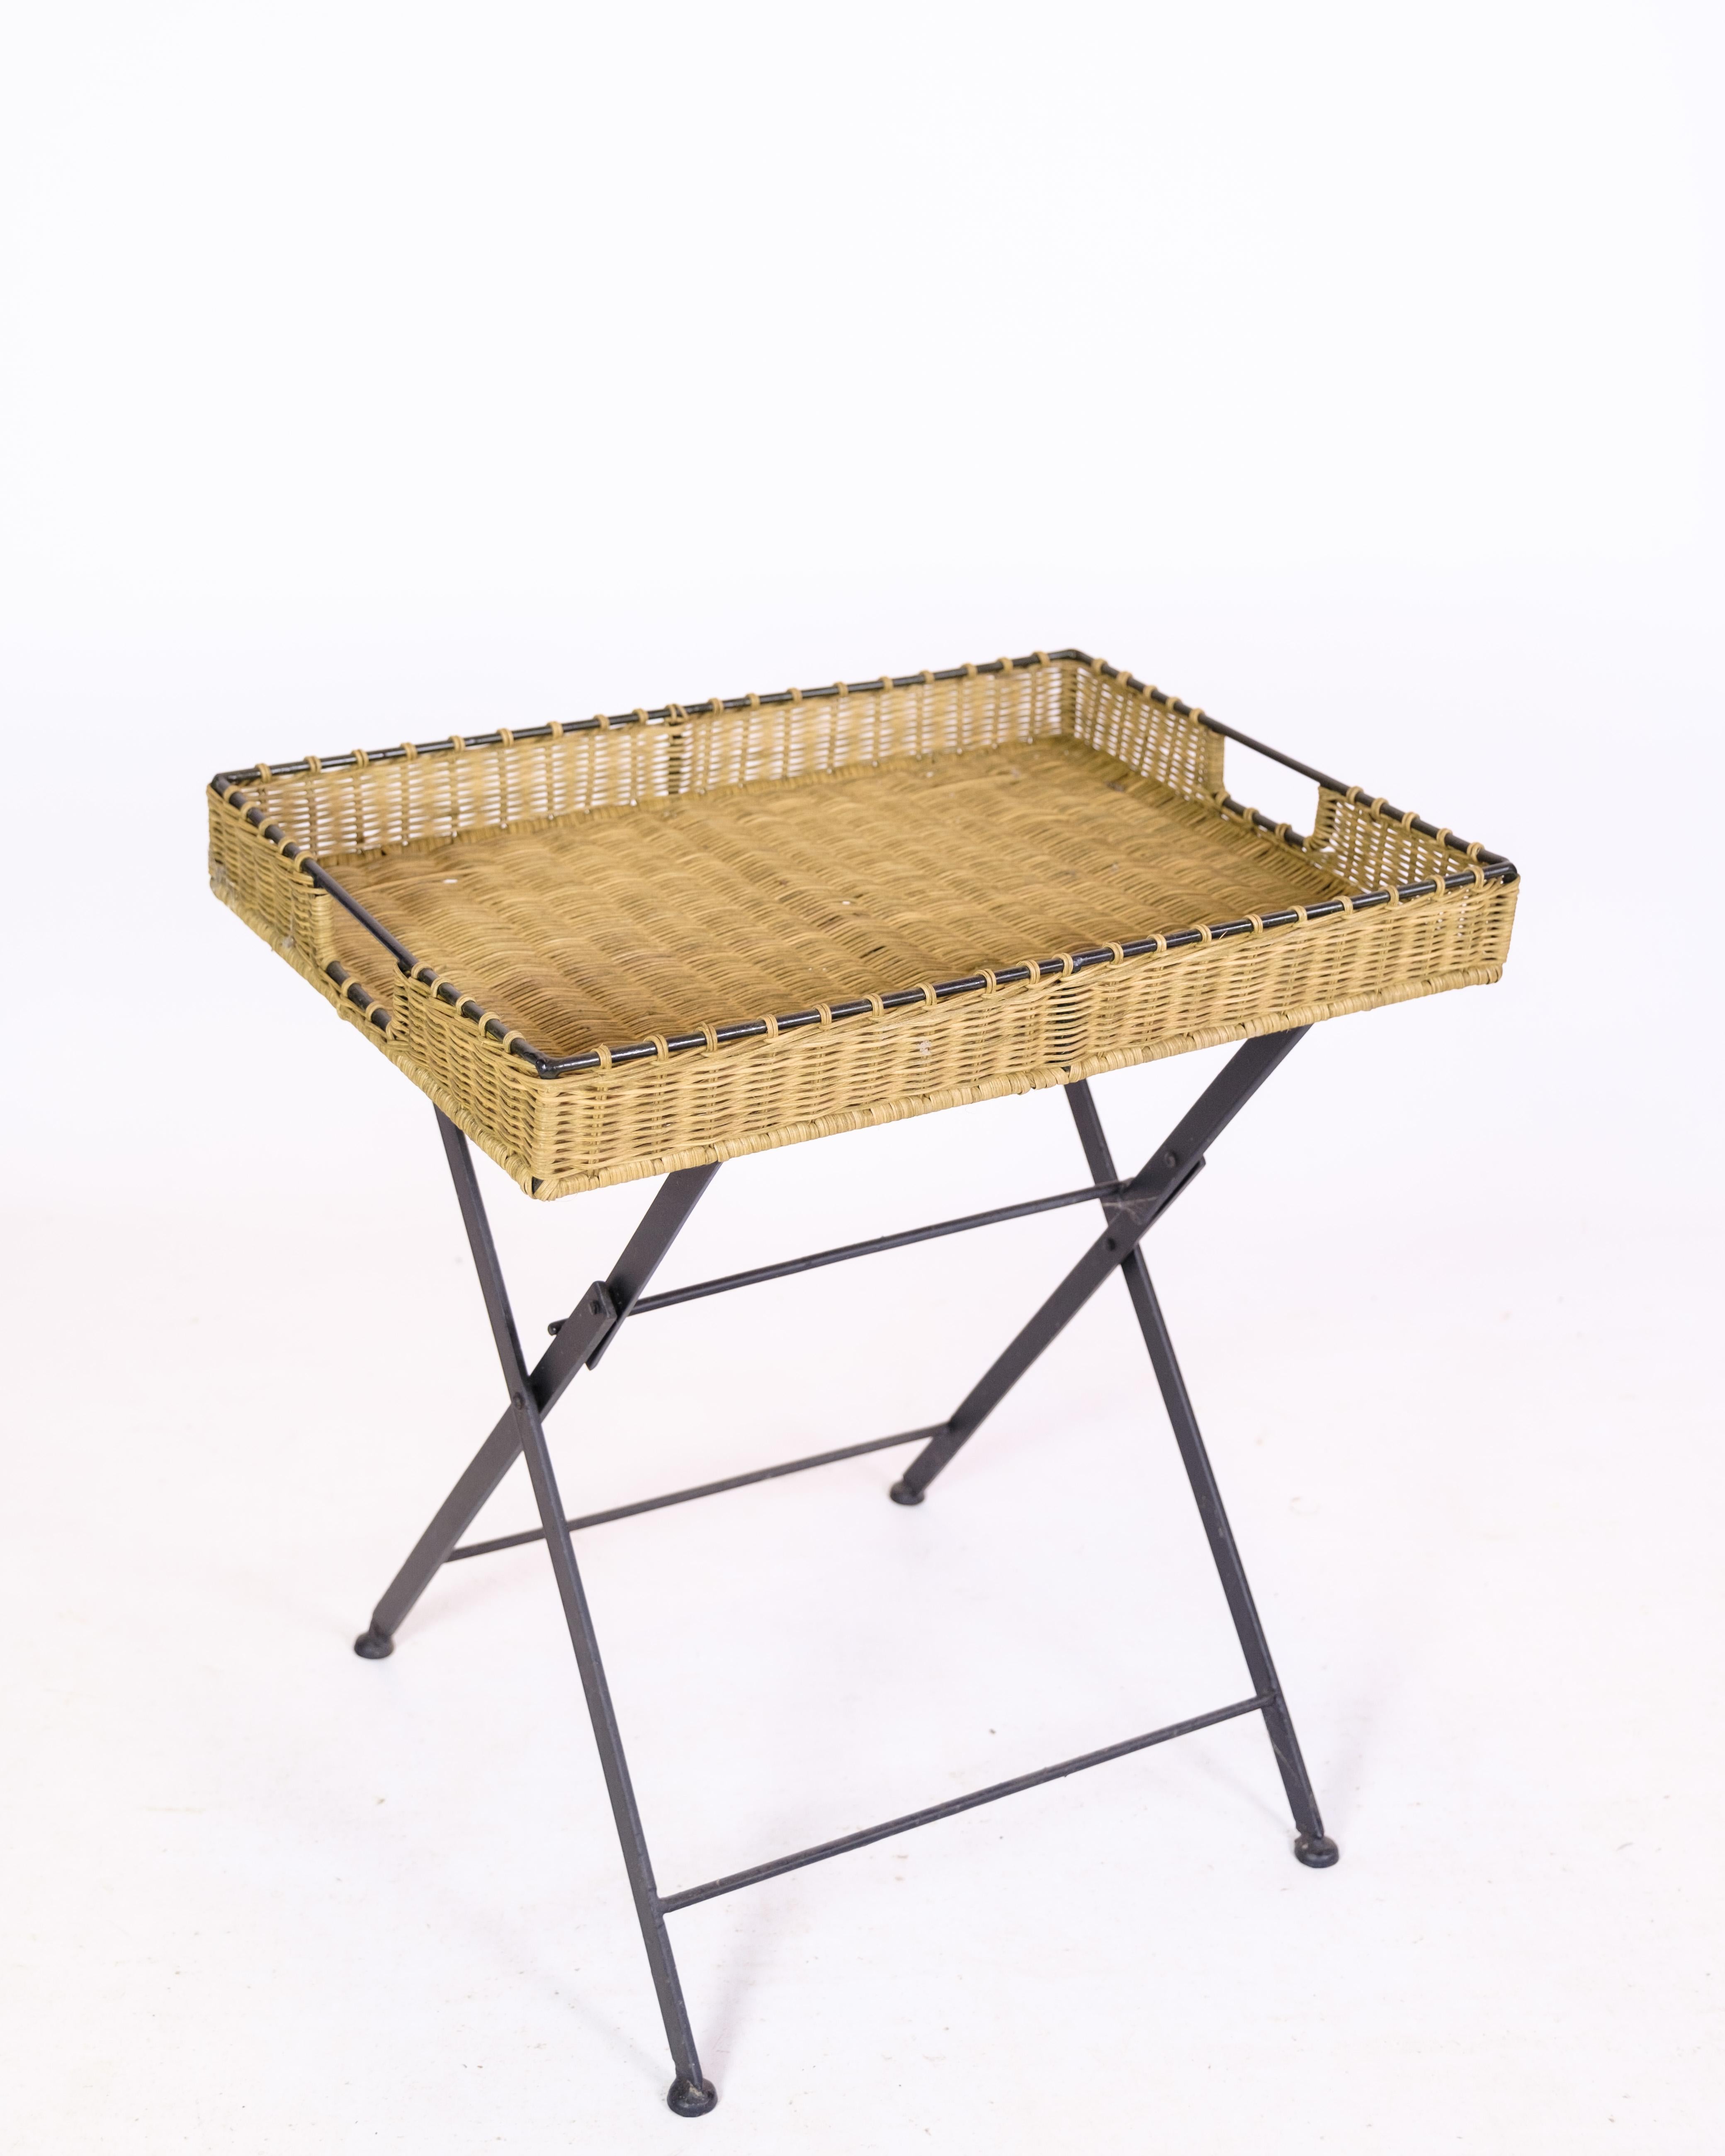 Side Table of Wicker Tray with Metal Legs from the 1970s For Sale 1